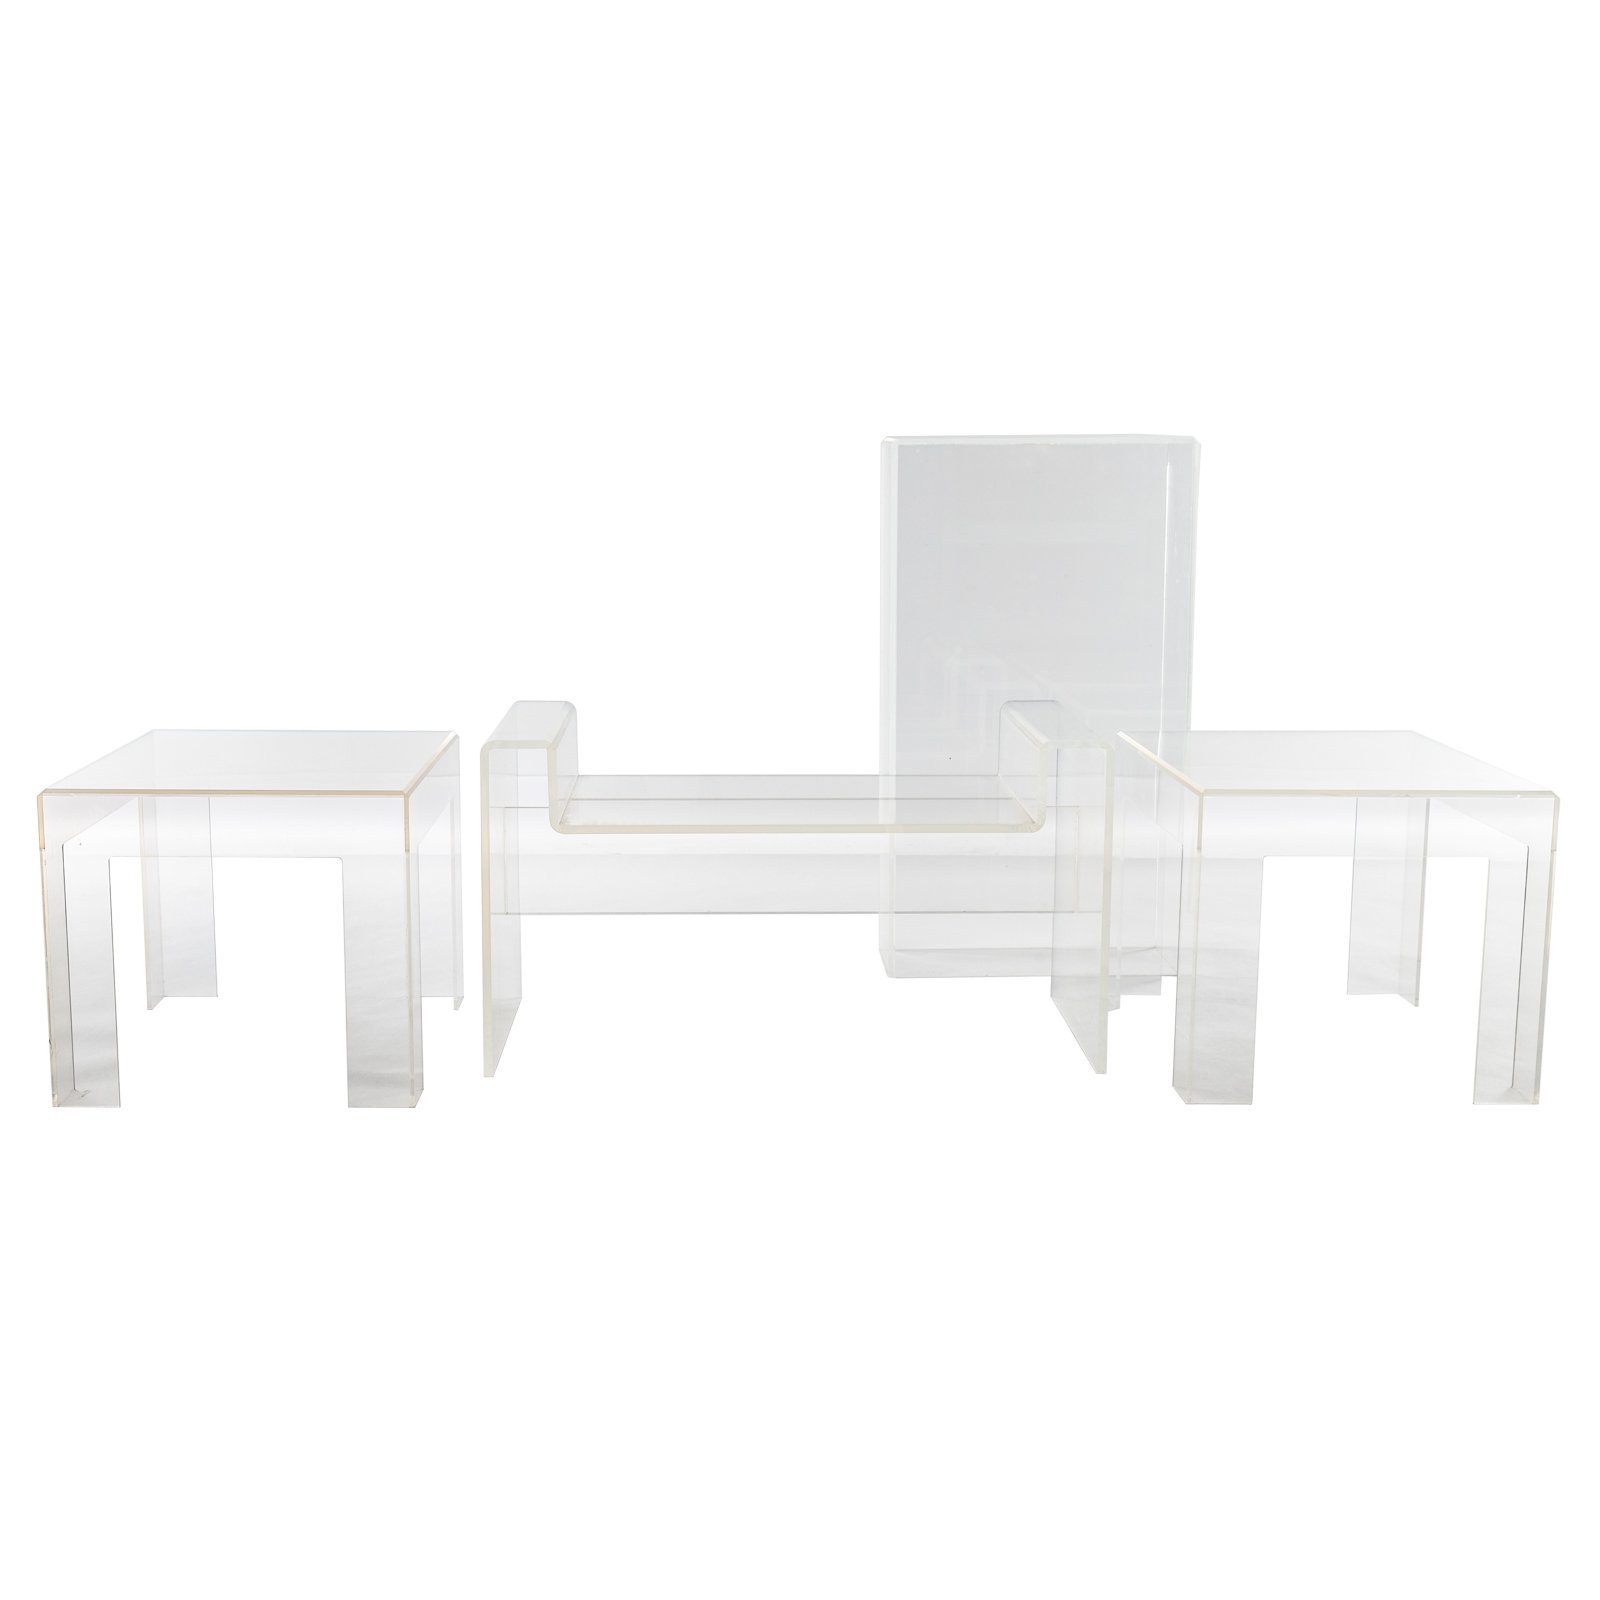 FOUR PIECES OF CLEAR LUCITE FURNITURE